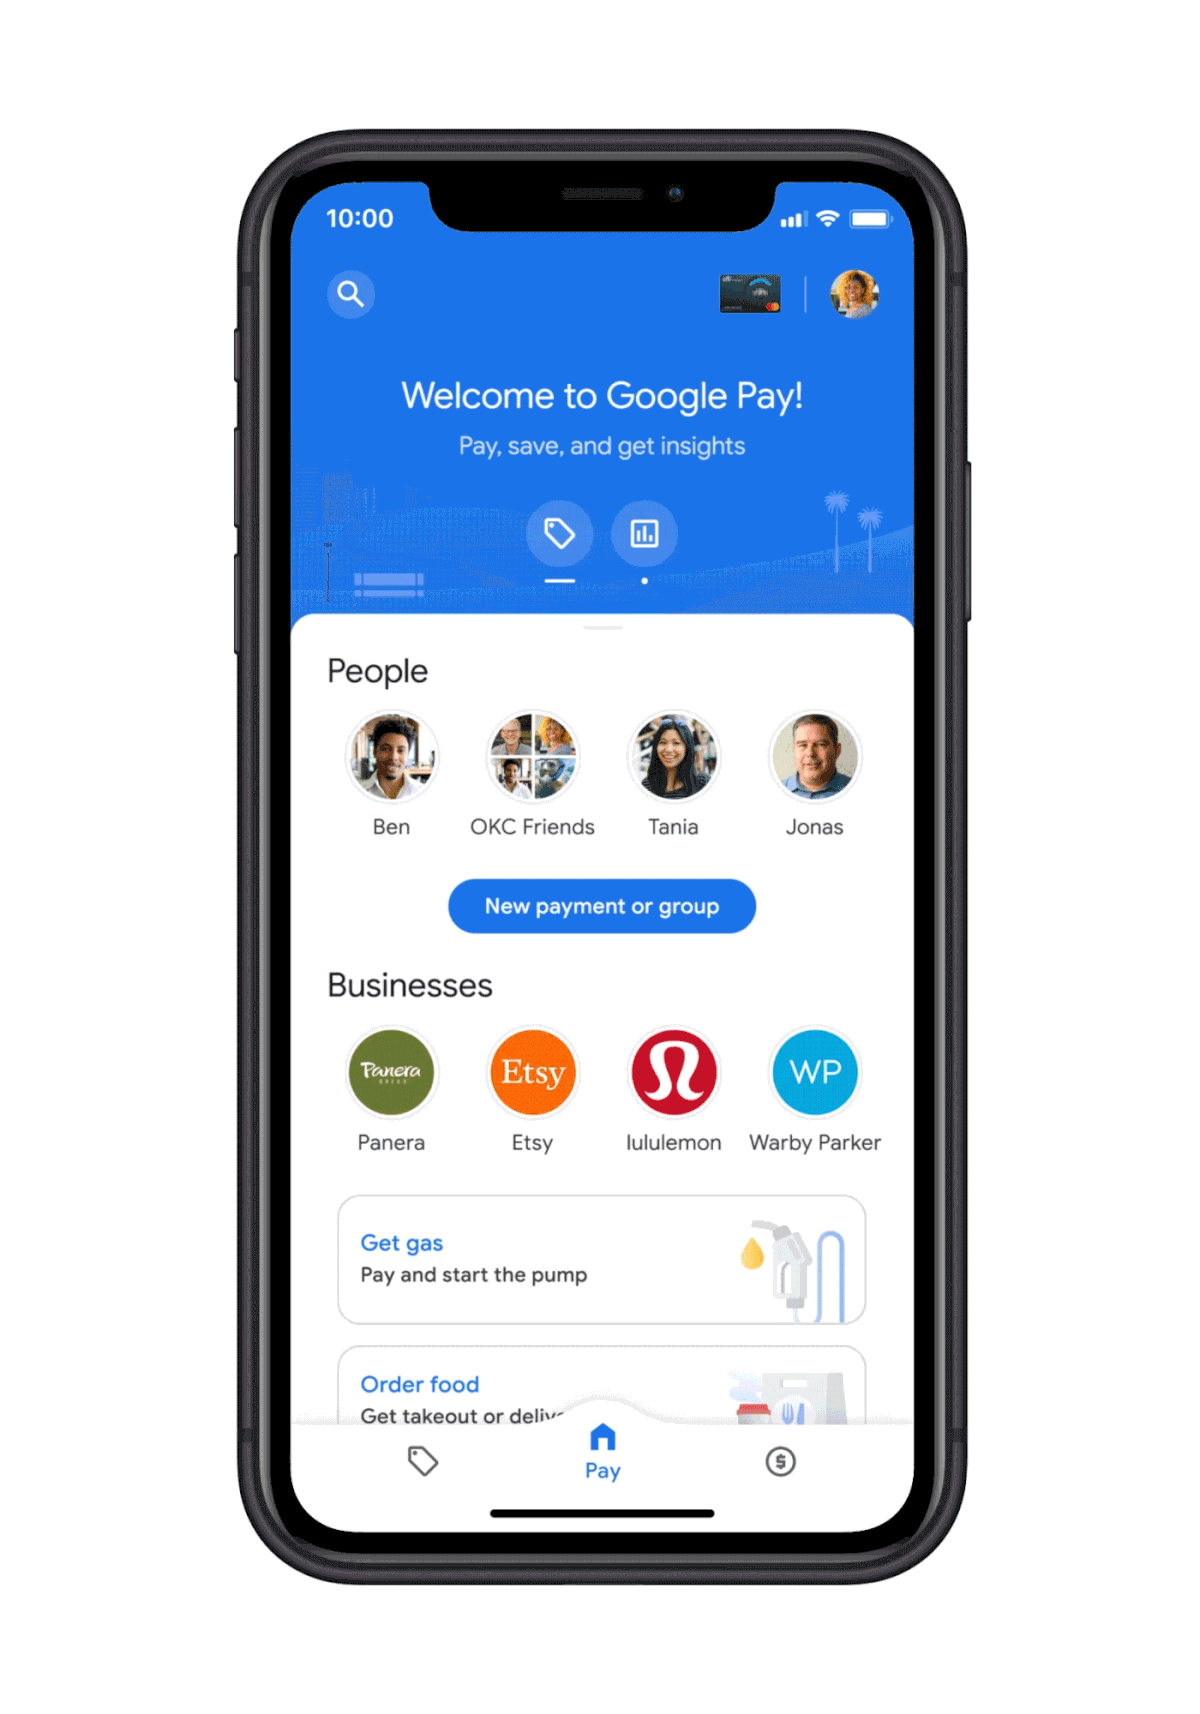 Google Pay's new interface